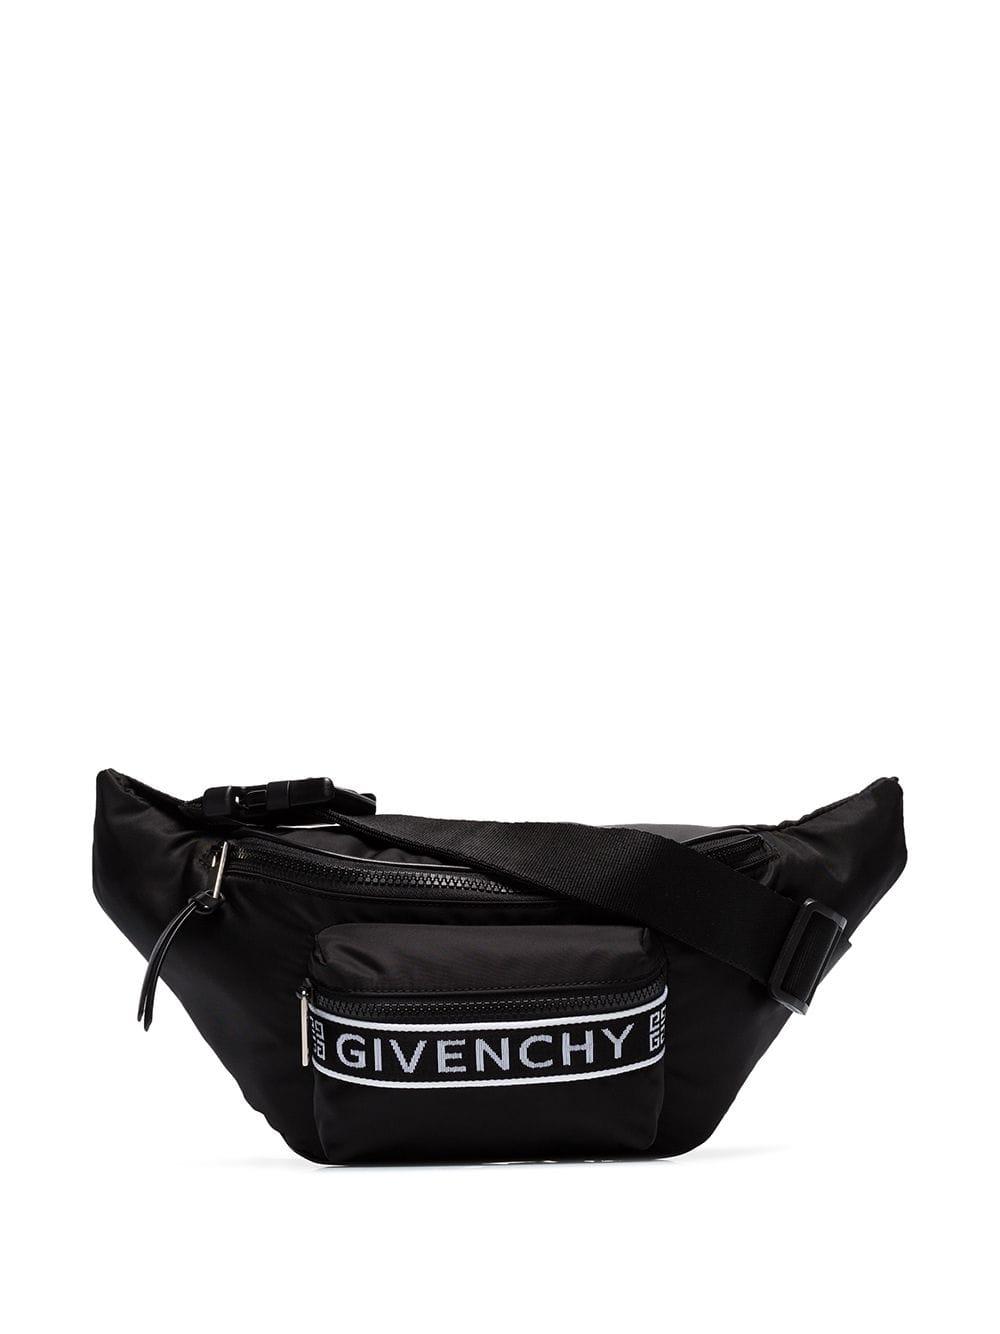 Givenchy Synthetic Lg Bum Bag in Black for Men - Lyst